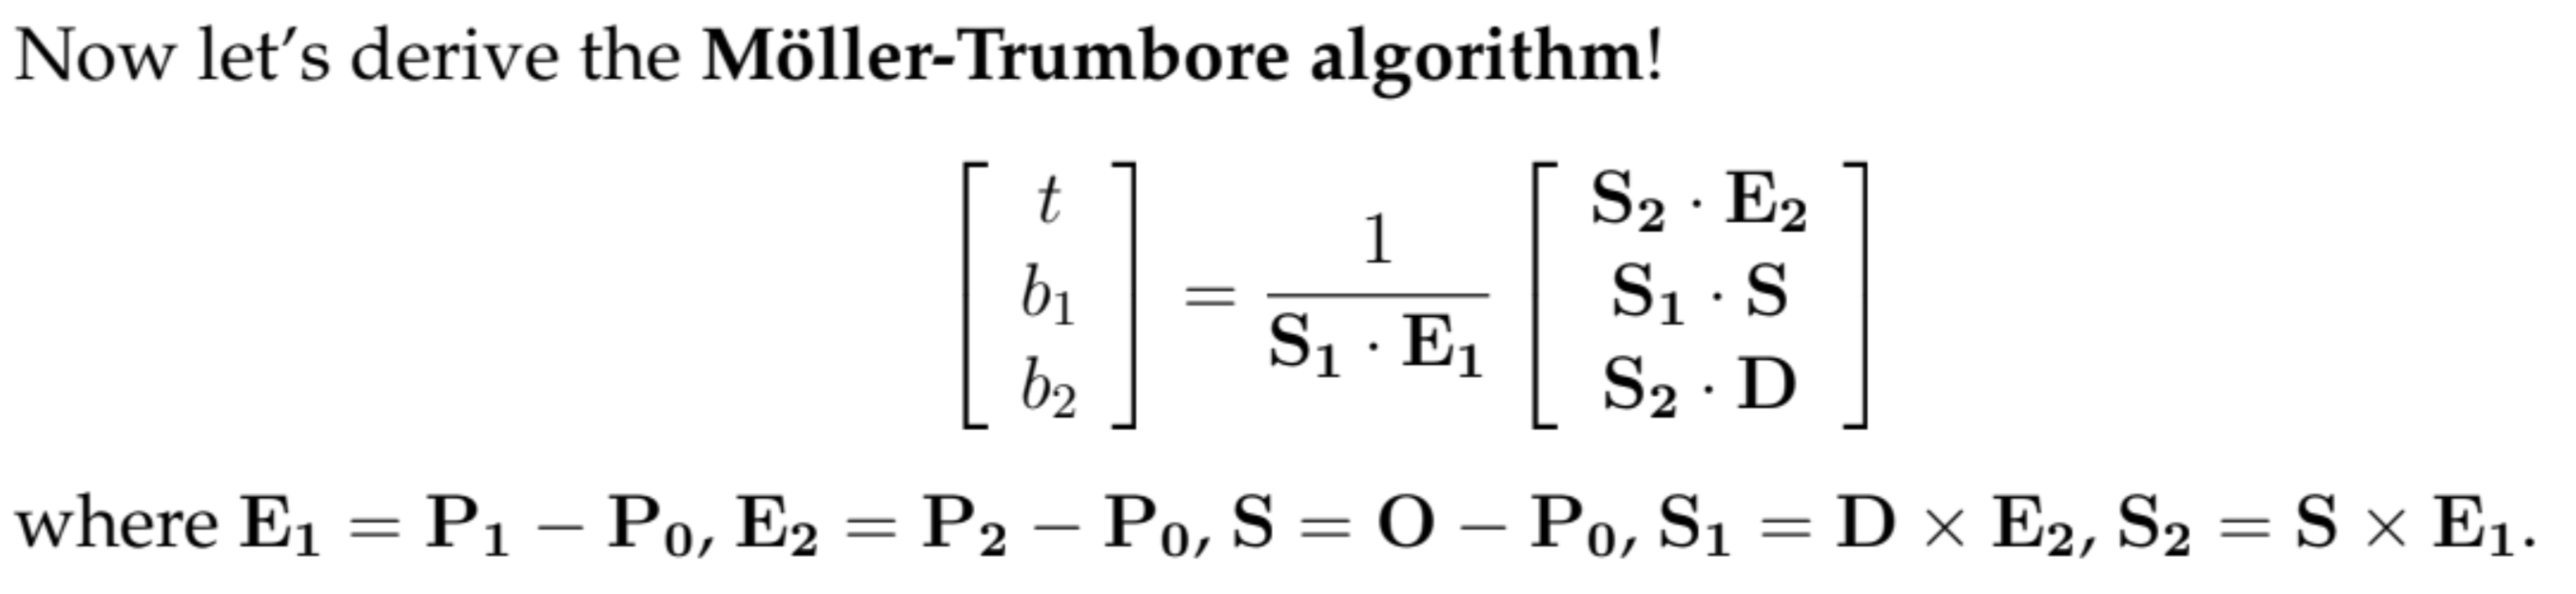 Notation for the algorithm